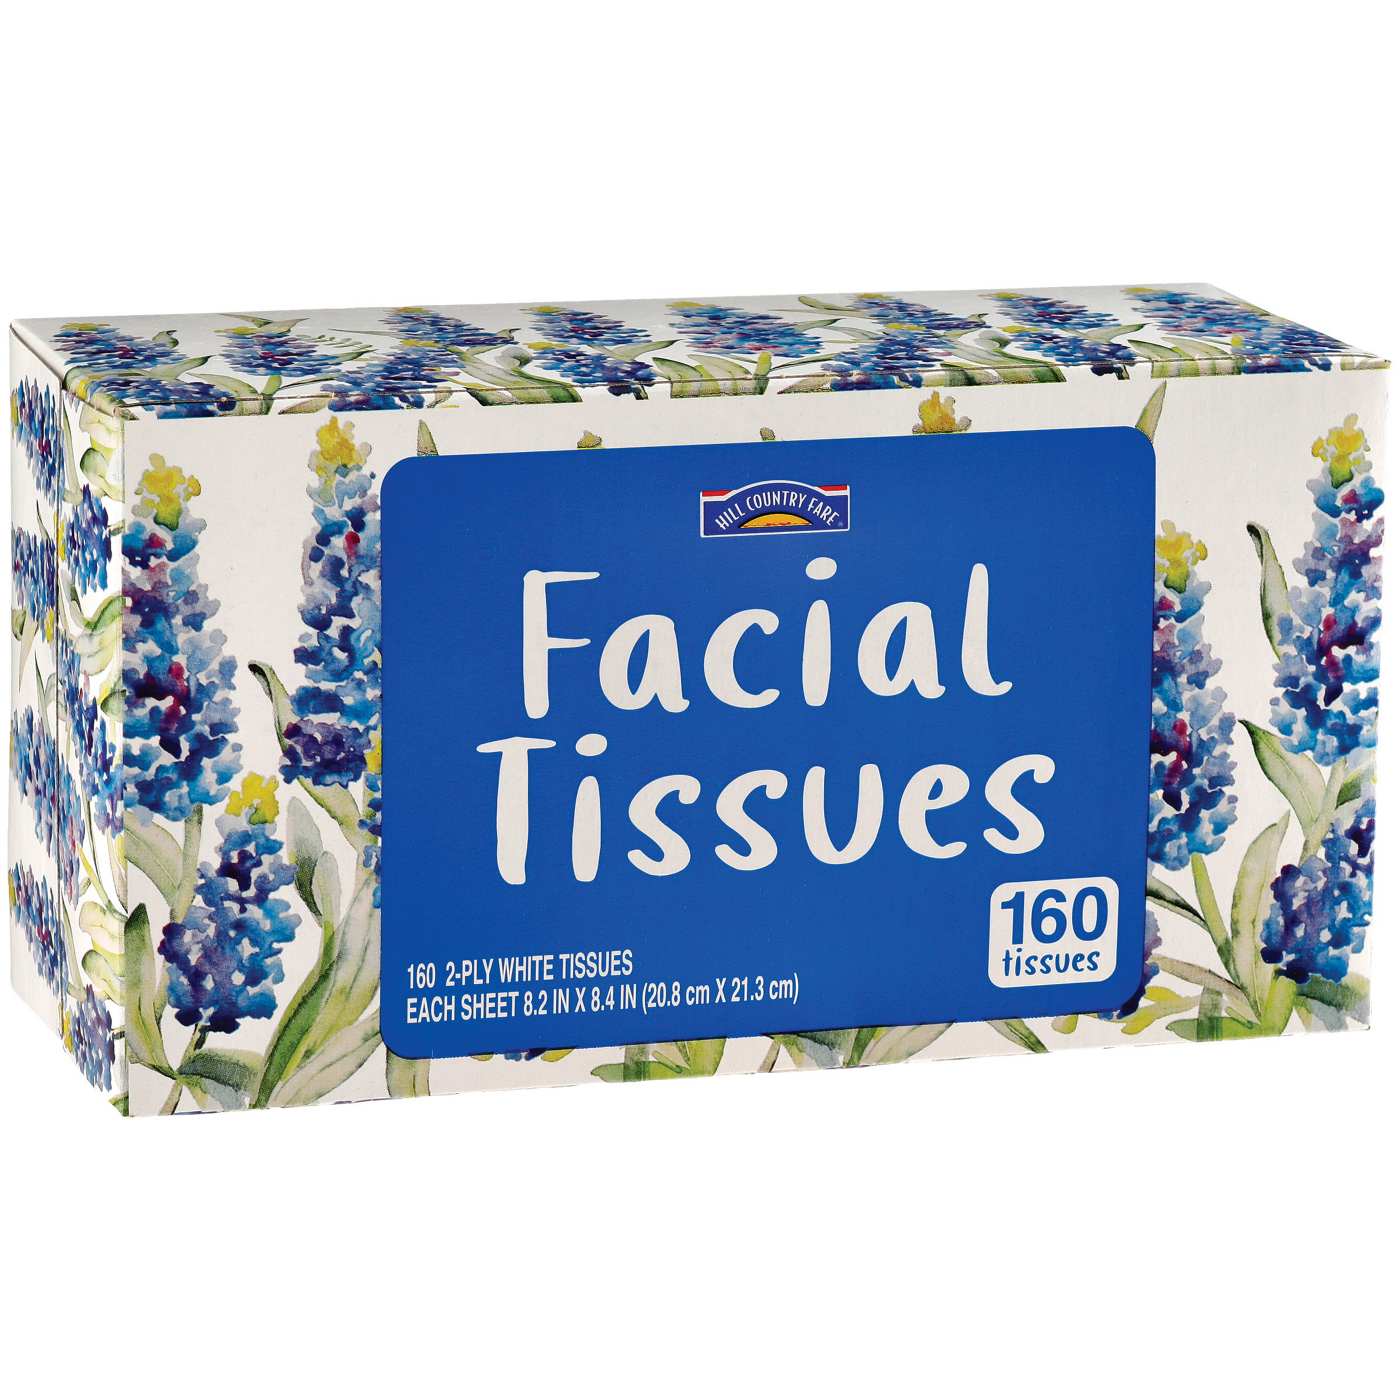 Hill Country Fare Facial Tissues; image 4 of 4